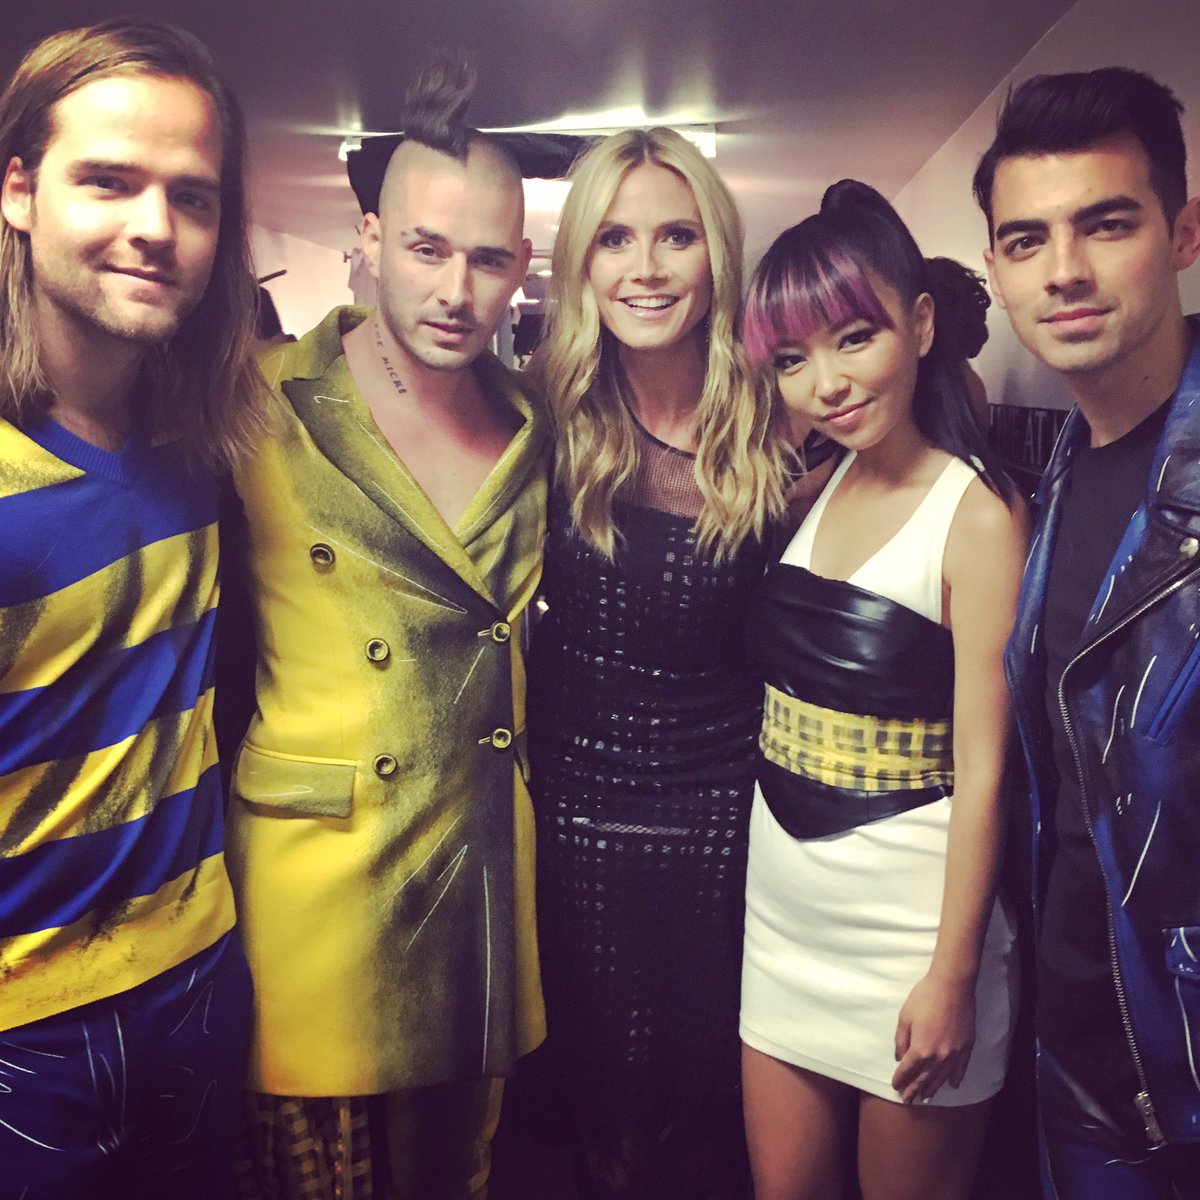 Bumped into these guys @dnce backstage https://t.co/UUtXvGR6lb